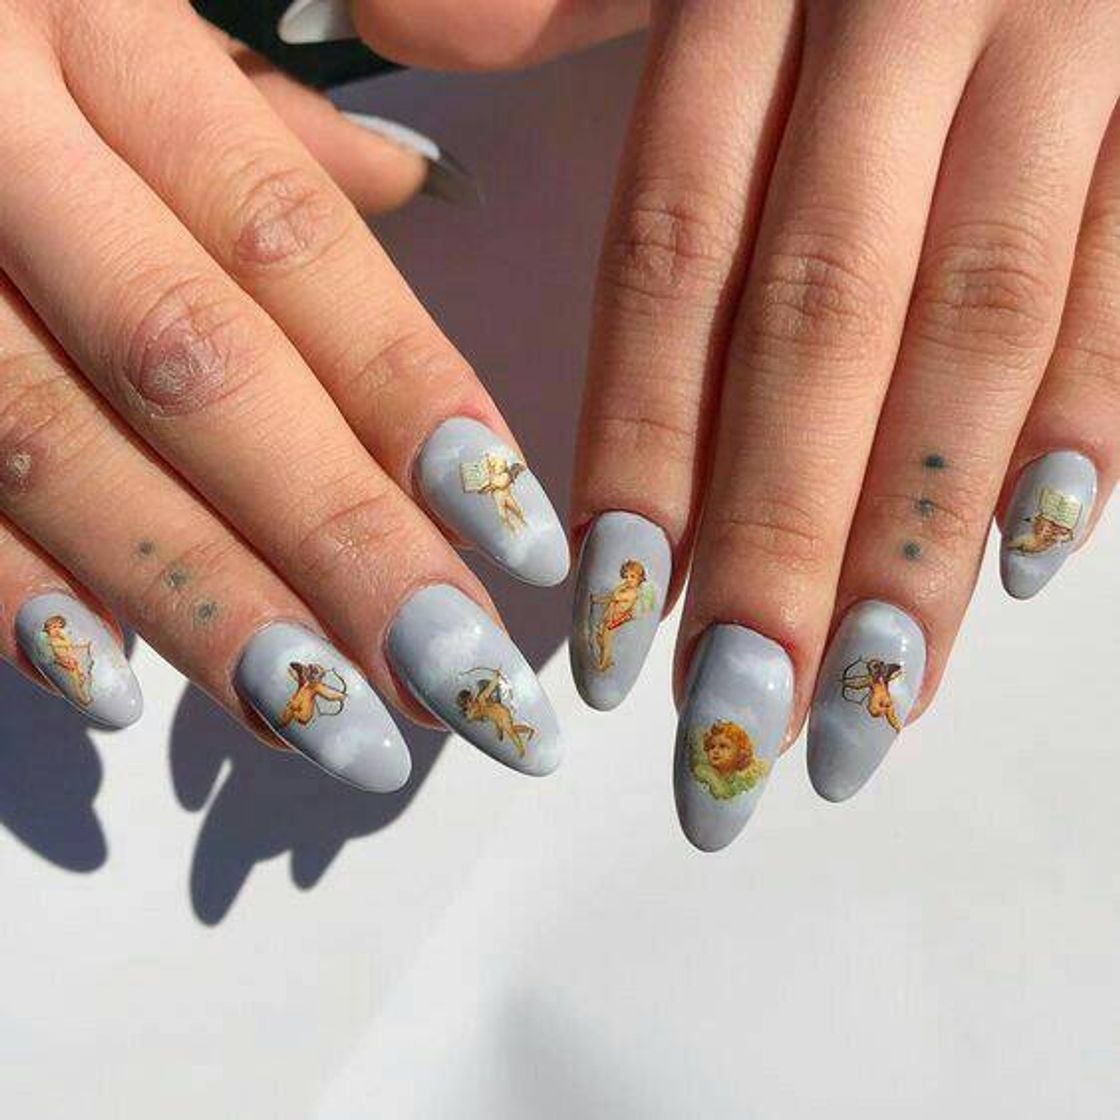 Art on the Nails